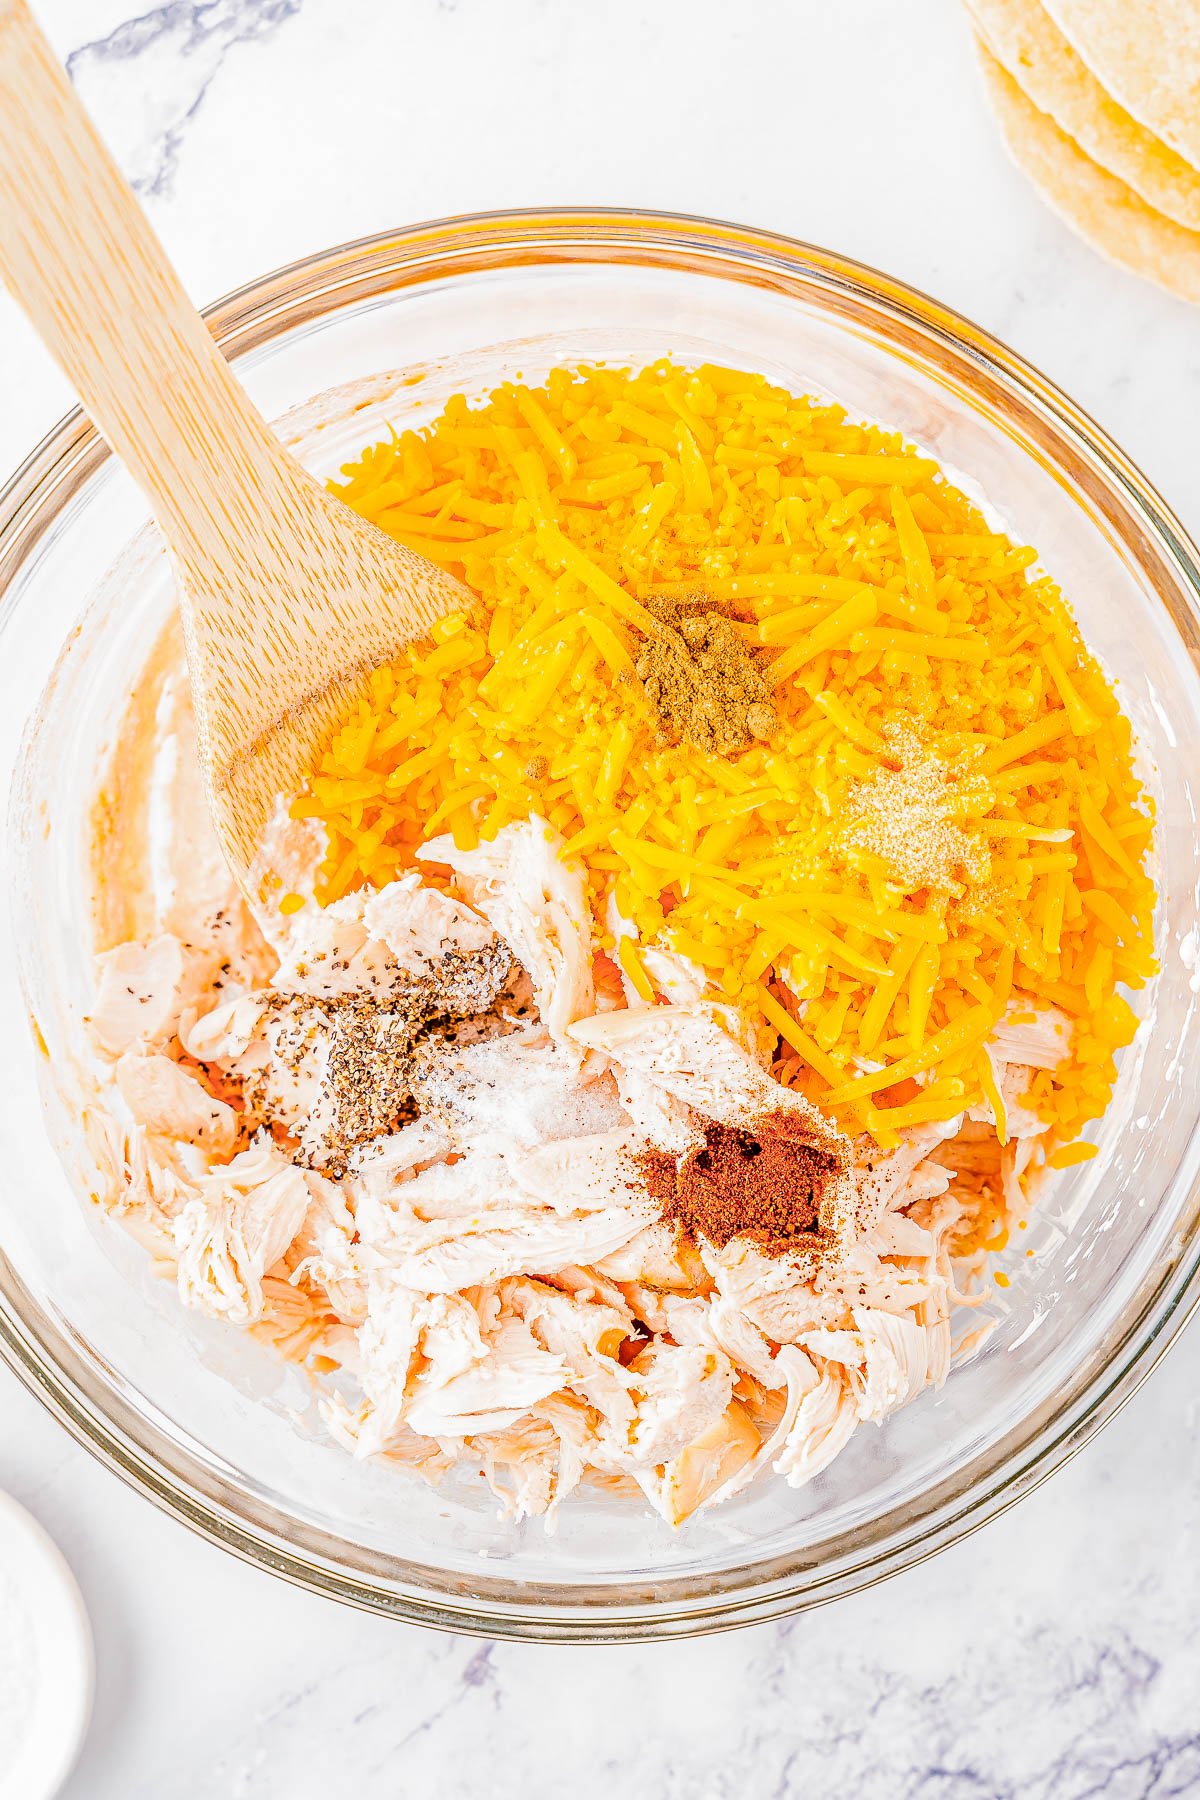 Glass bowl of shredded chicken and seasoned with spices, mixed with a wooden spoon, on a marble surface.